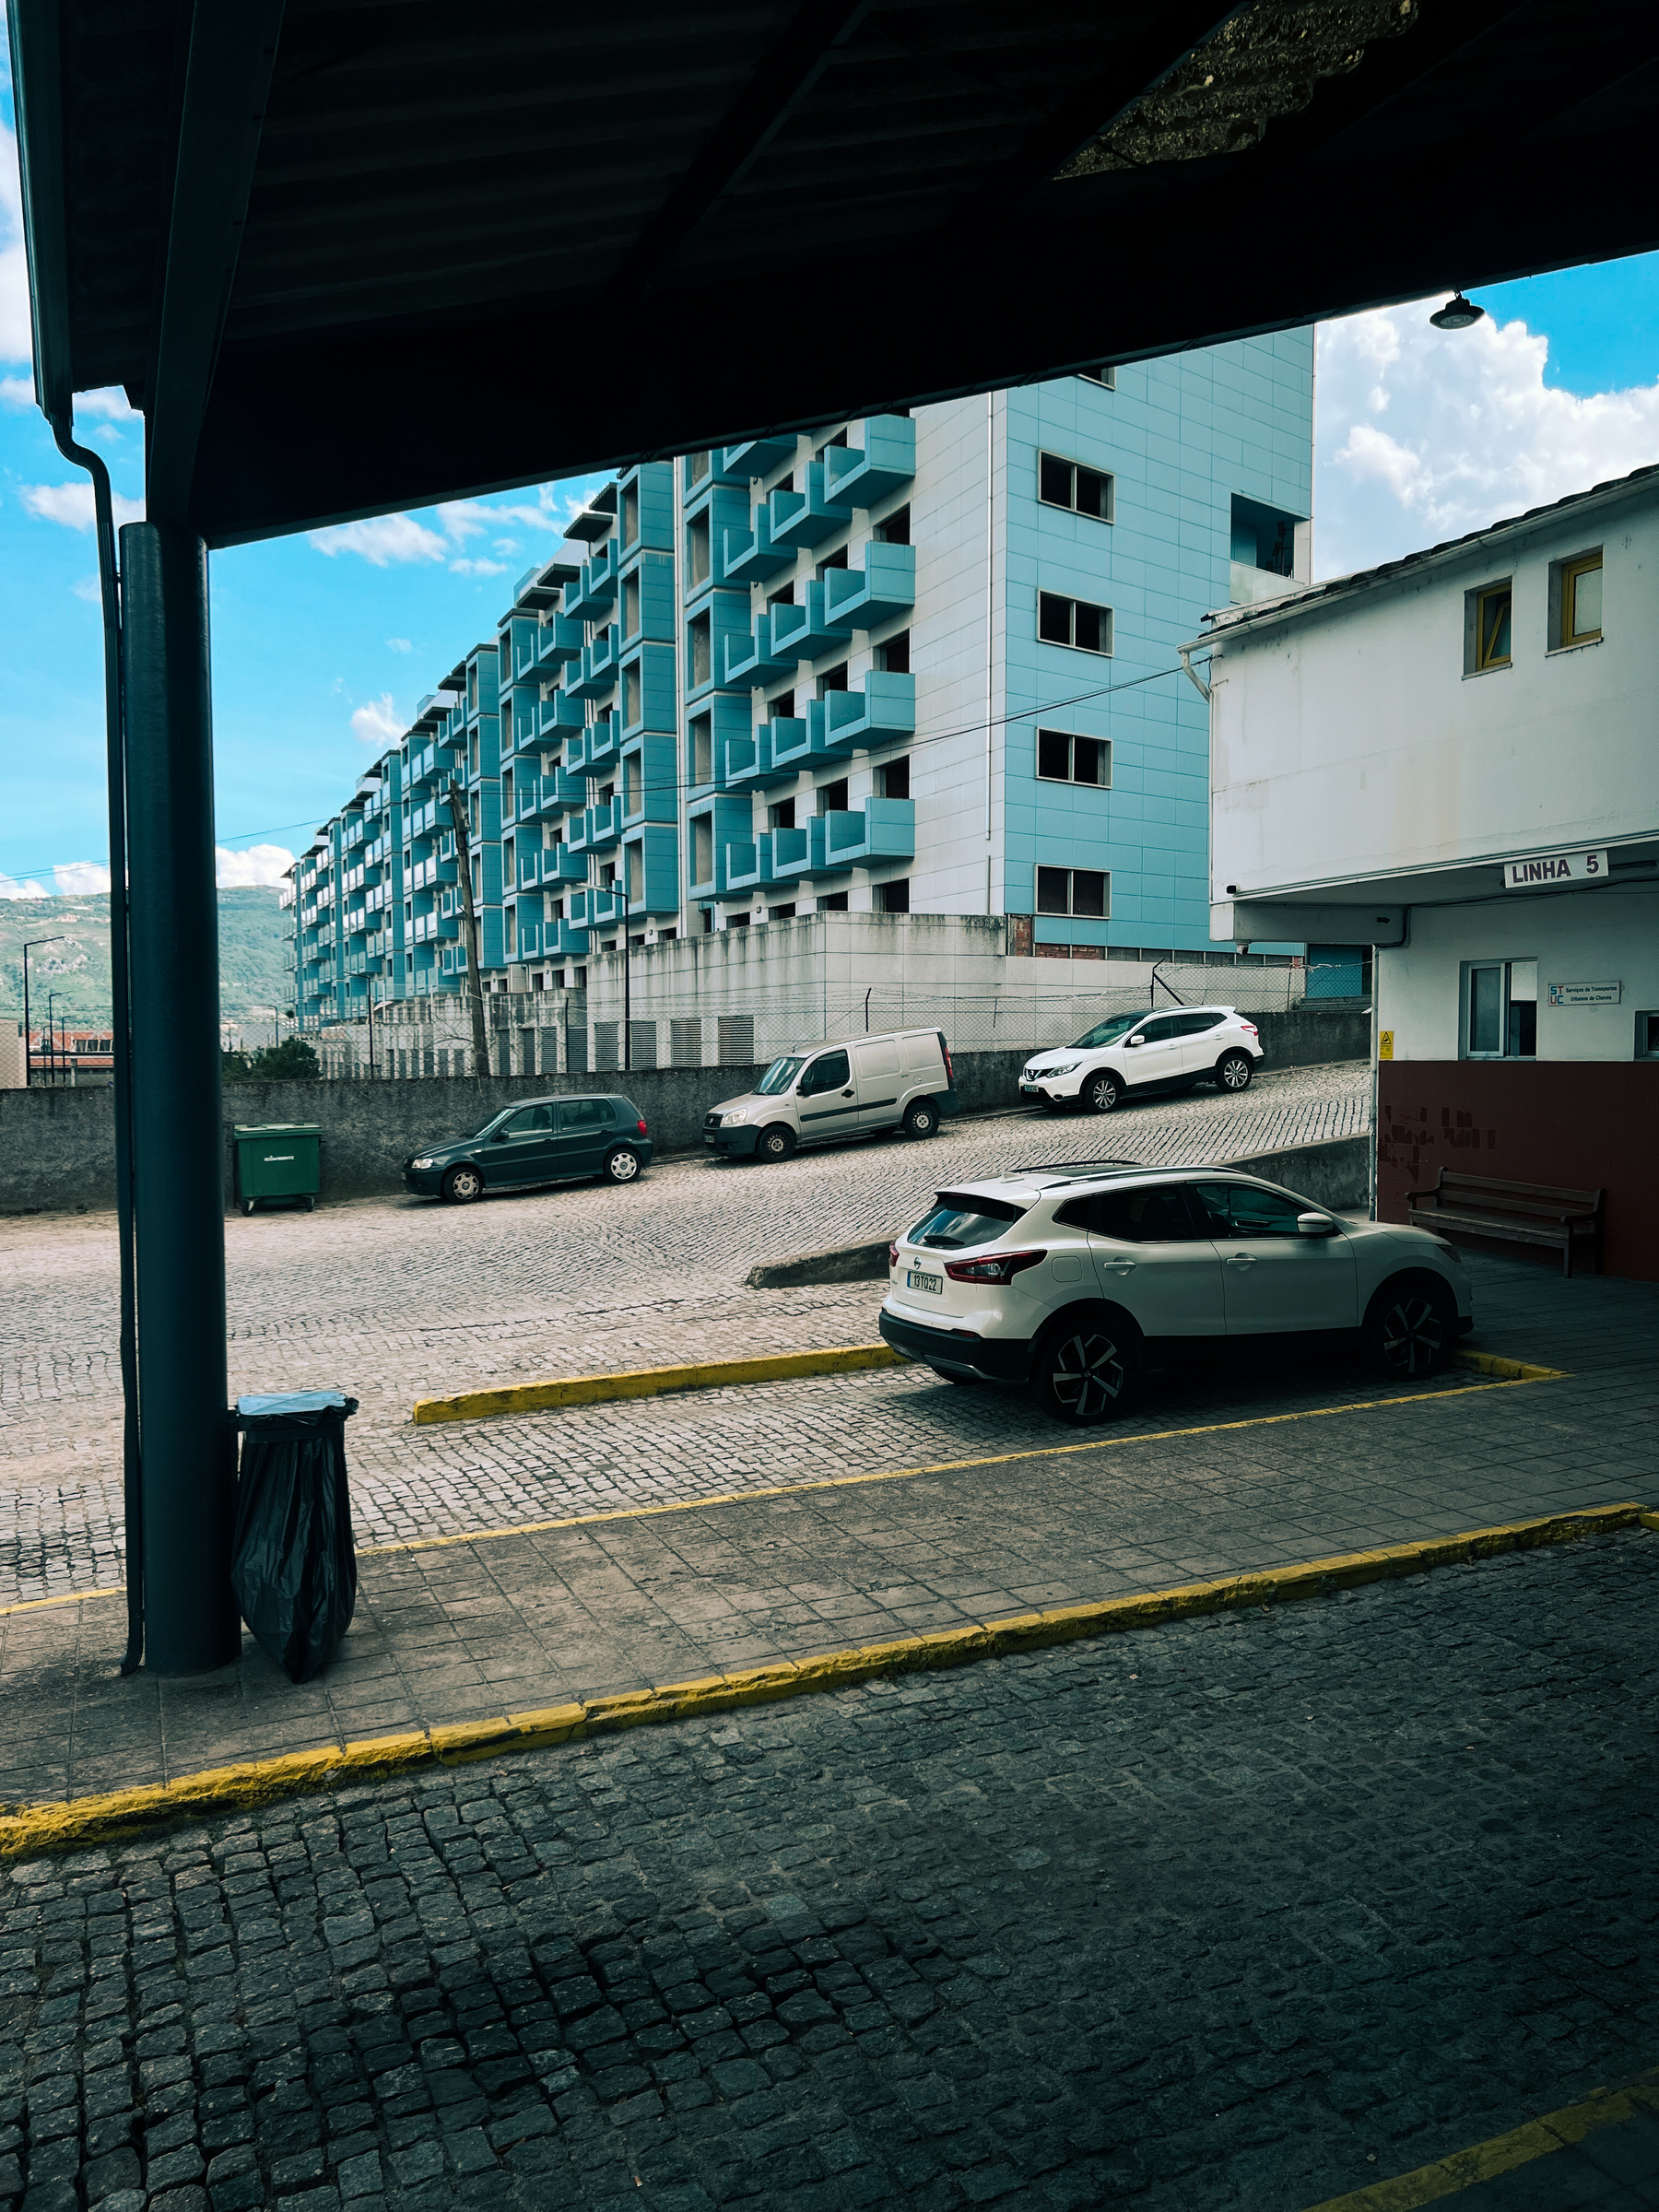 A car is parked inside a bus depot. Ugly blue building in the back. 